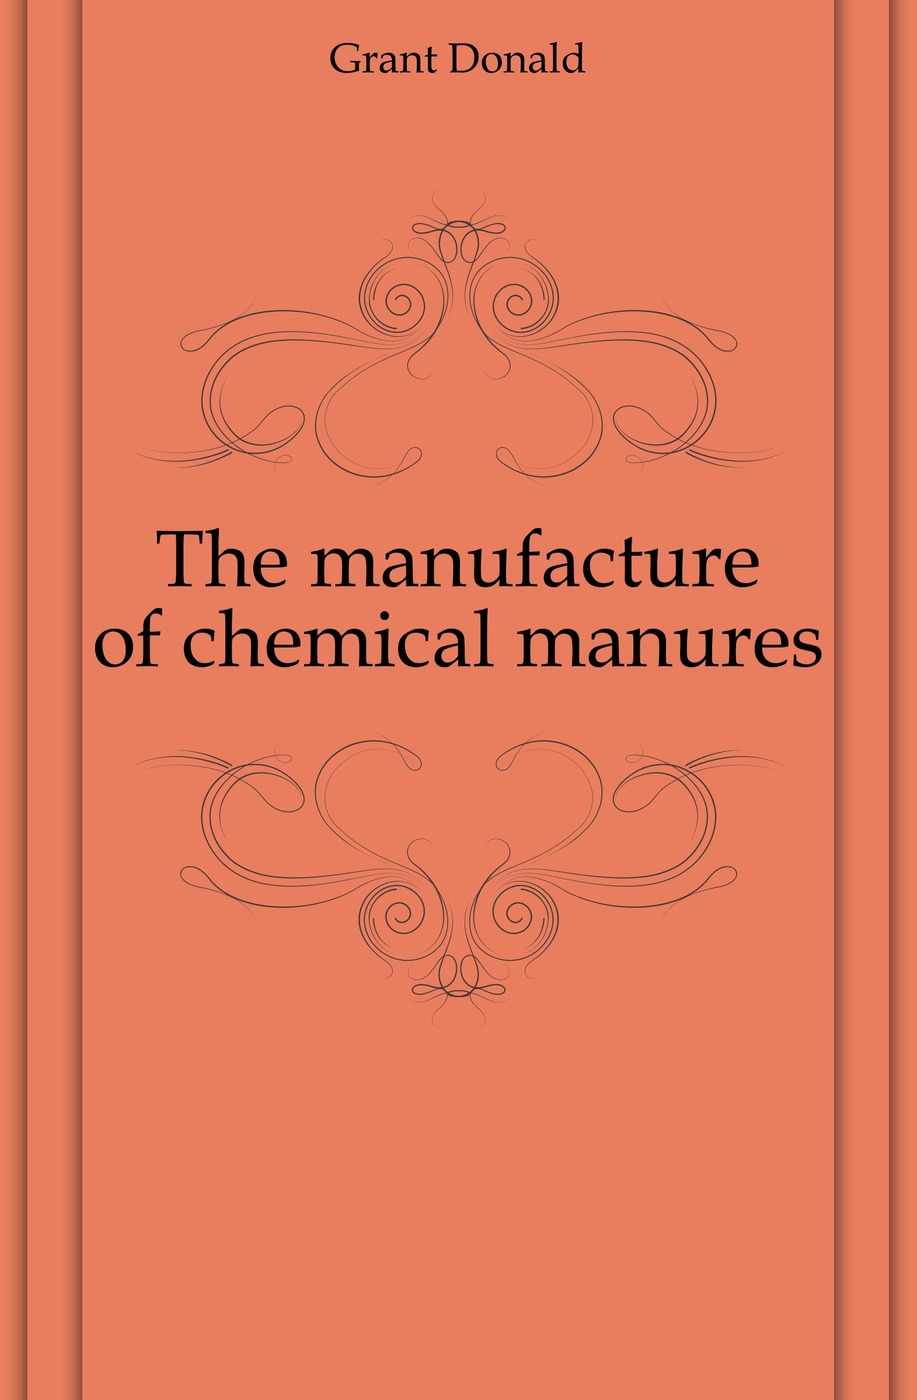 The manufacture of chemical manures